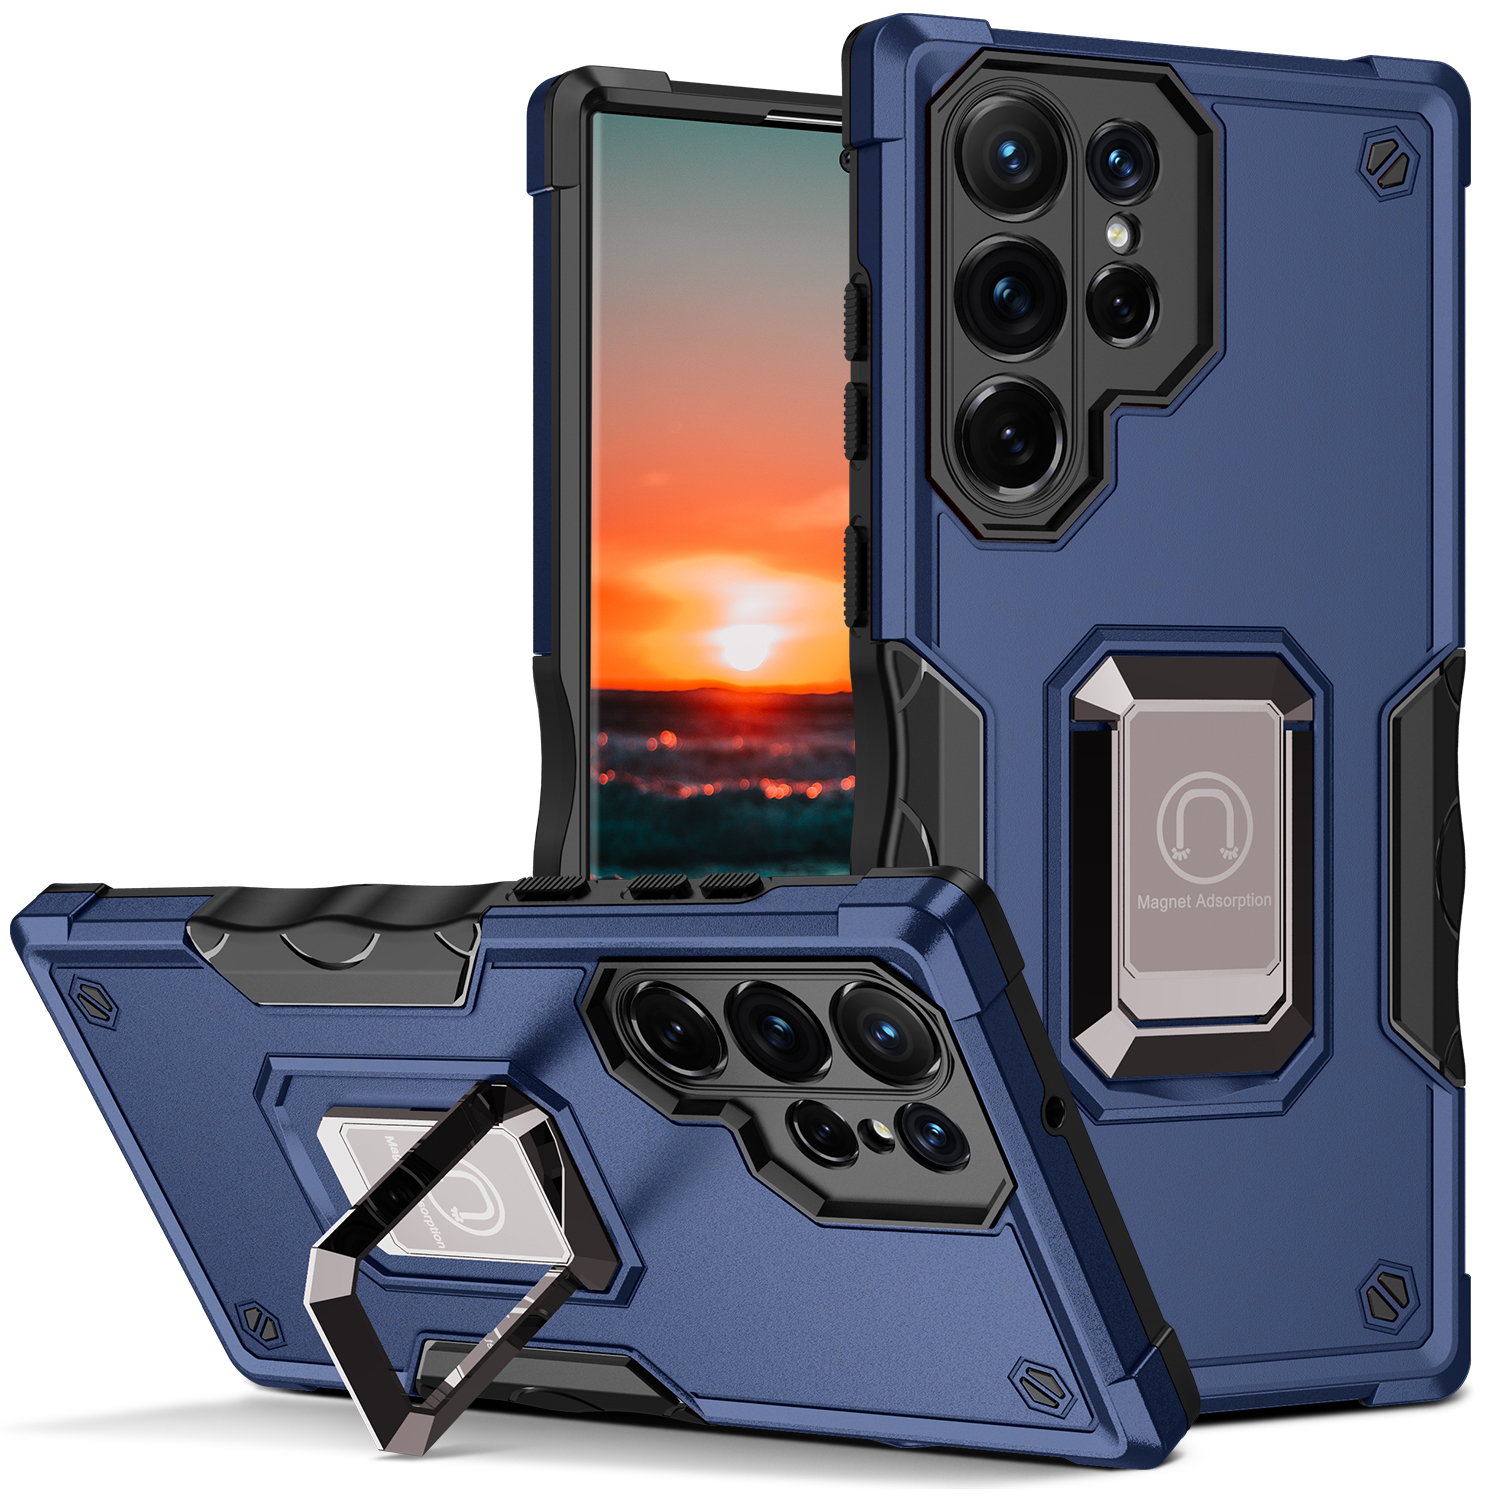 

Armor Rugged Defender Heavy Duty Cases Anti-Slip Ring Stand For iPhone 13 12 11 Pro Max XR XS 8 Plus Samsung S21 FE S22 Ultra A21S A12 A22 A32 A03 Core A02S A03S A13 A33 A53 A73, Blue